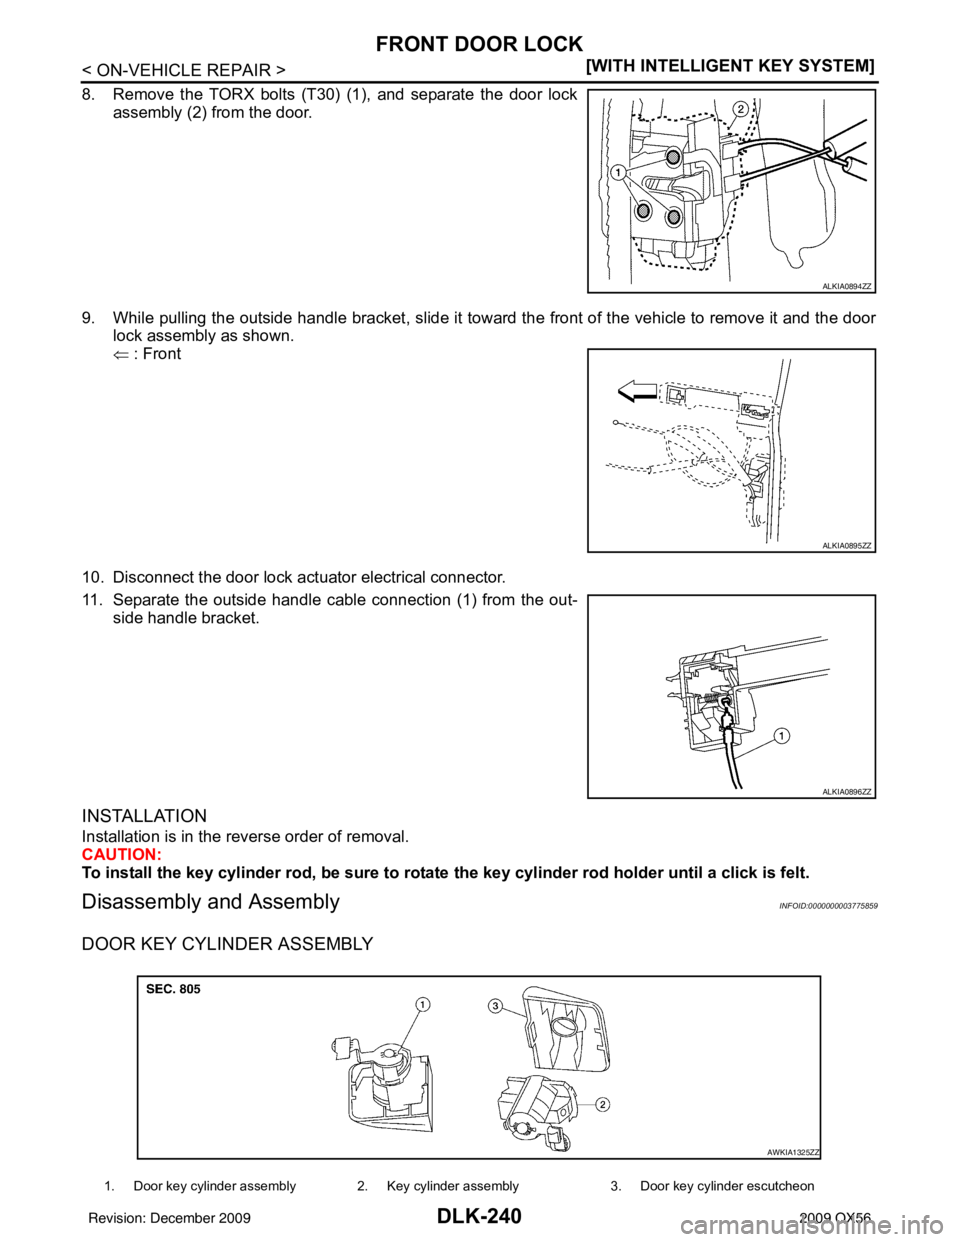 INFINITI QX56 2009  Factory Service Manual DLK-240
< ON-VEHICLE REPAIR >[WITH INTELLIGENT KEY SYSTEM]
FRONT DOOR LOCK
8. Remove the TORX bolts (T30) (1), and separate the door lock
assembly (2) from the door.
9. While pulling the outside handl